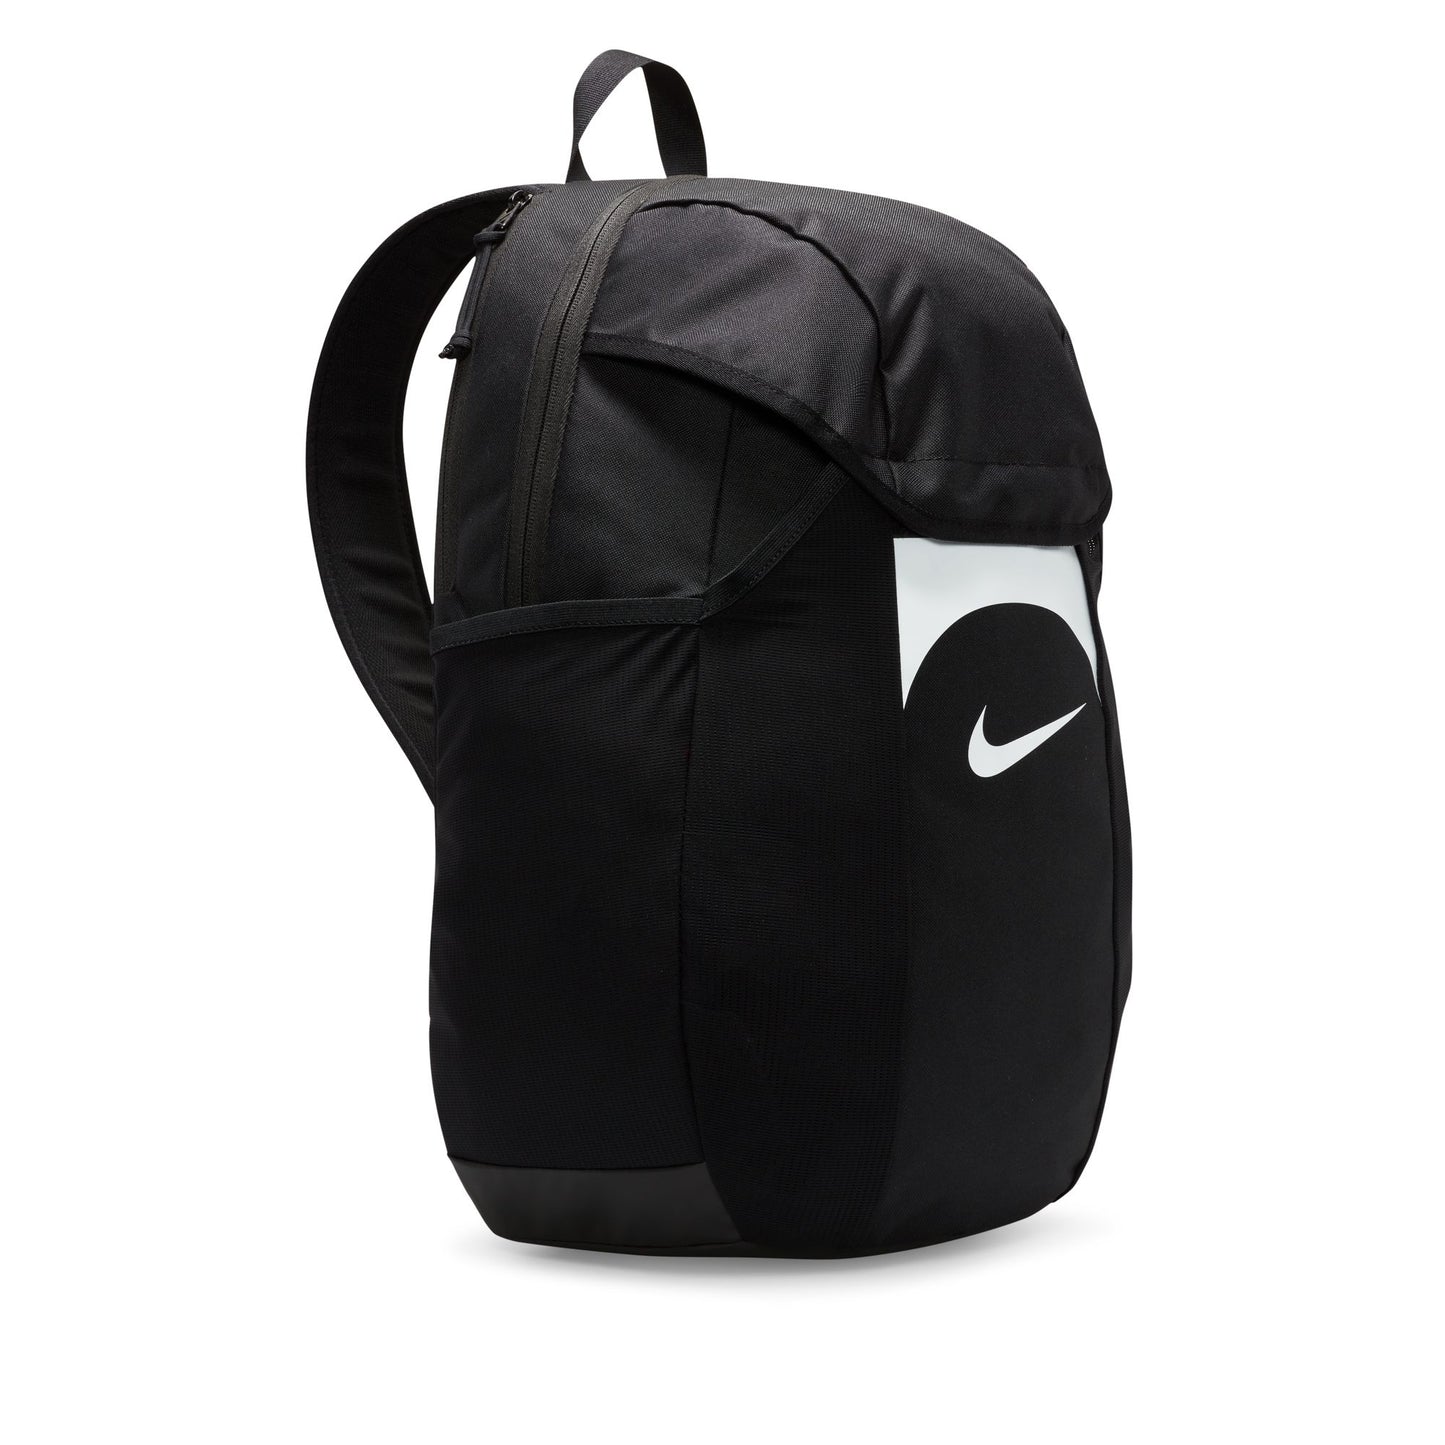 LAKES ACADEMY TEAM BACKPACK